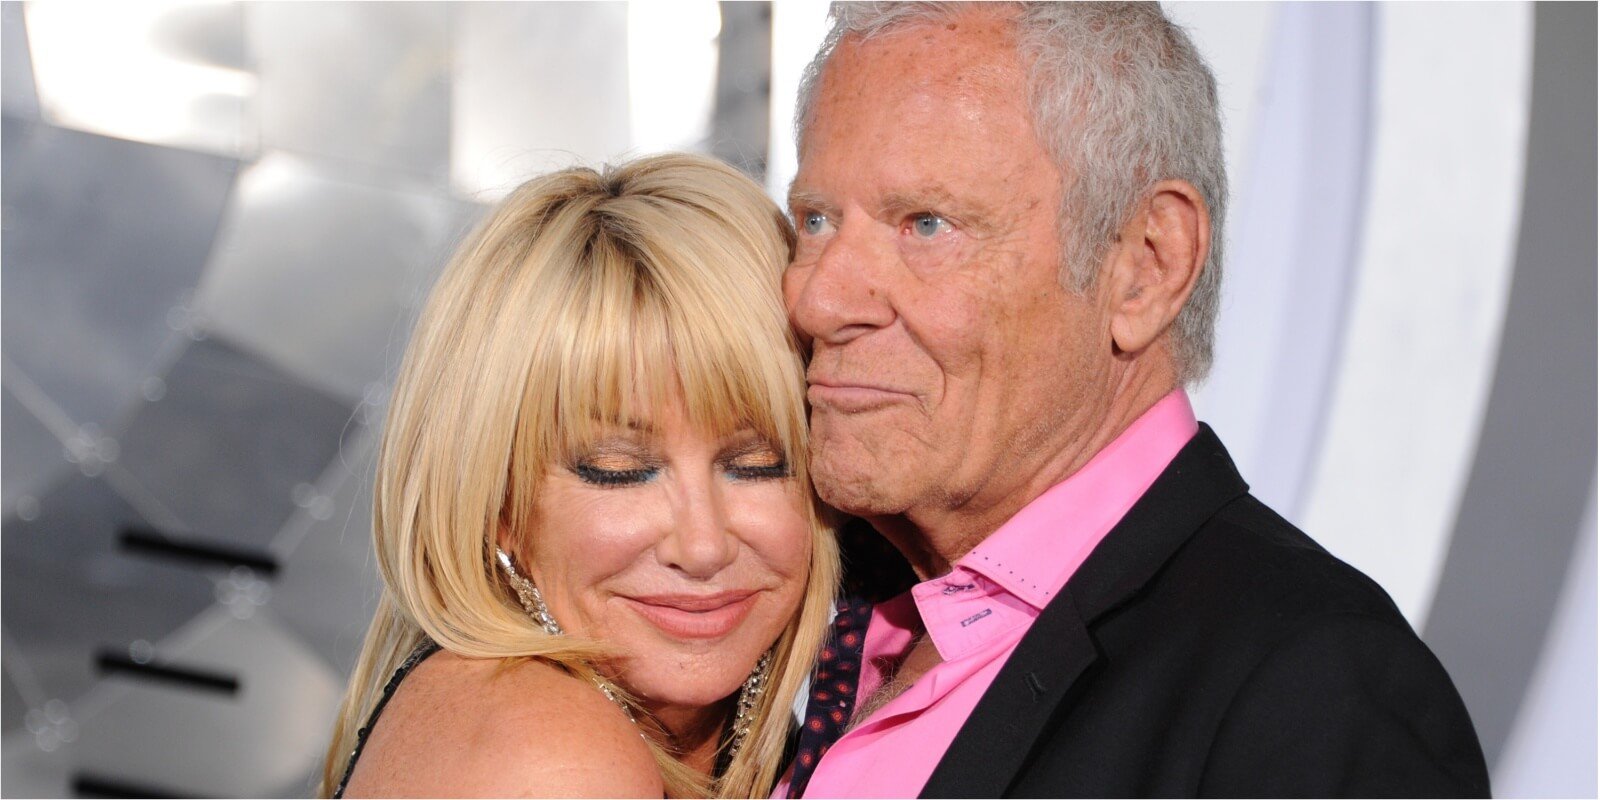 Suzanne Somers and husband Alan Hamel photographed in 2016.